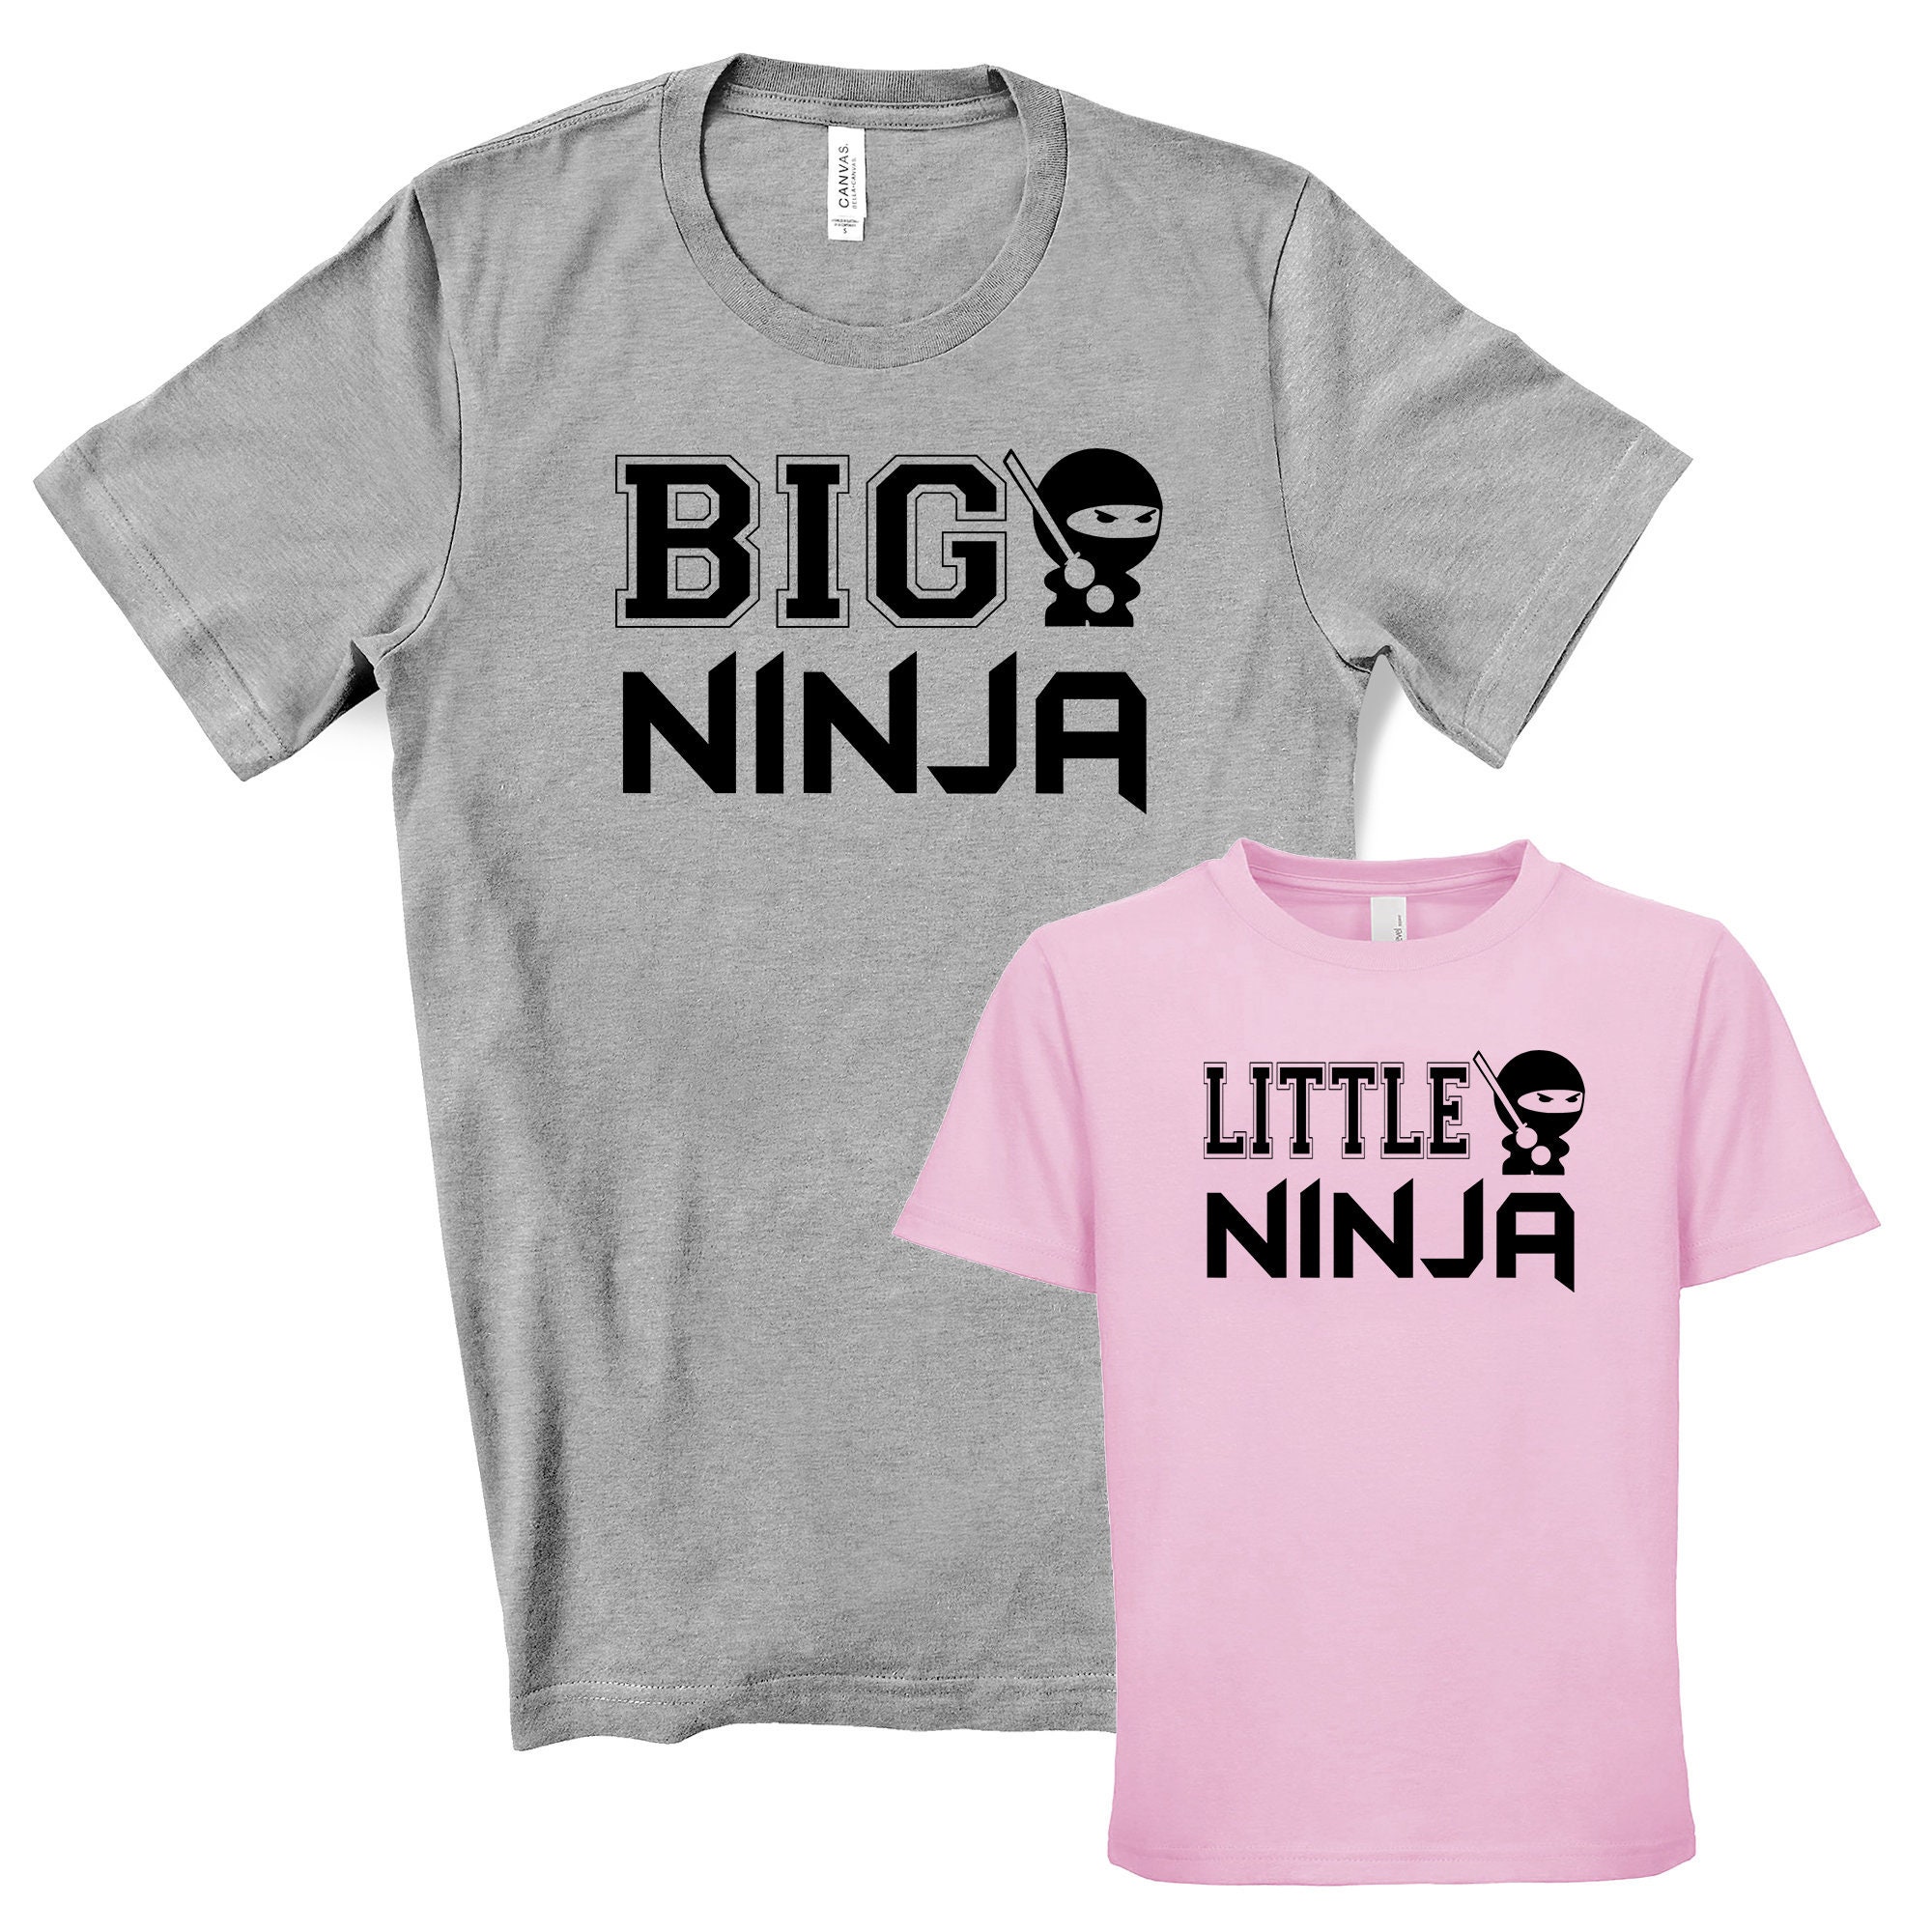 Turtley Awesome Shirt Personalized Ninja Turle Father and Kids Shirt -  Laughinks